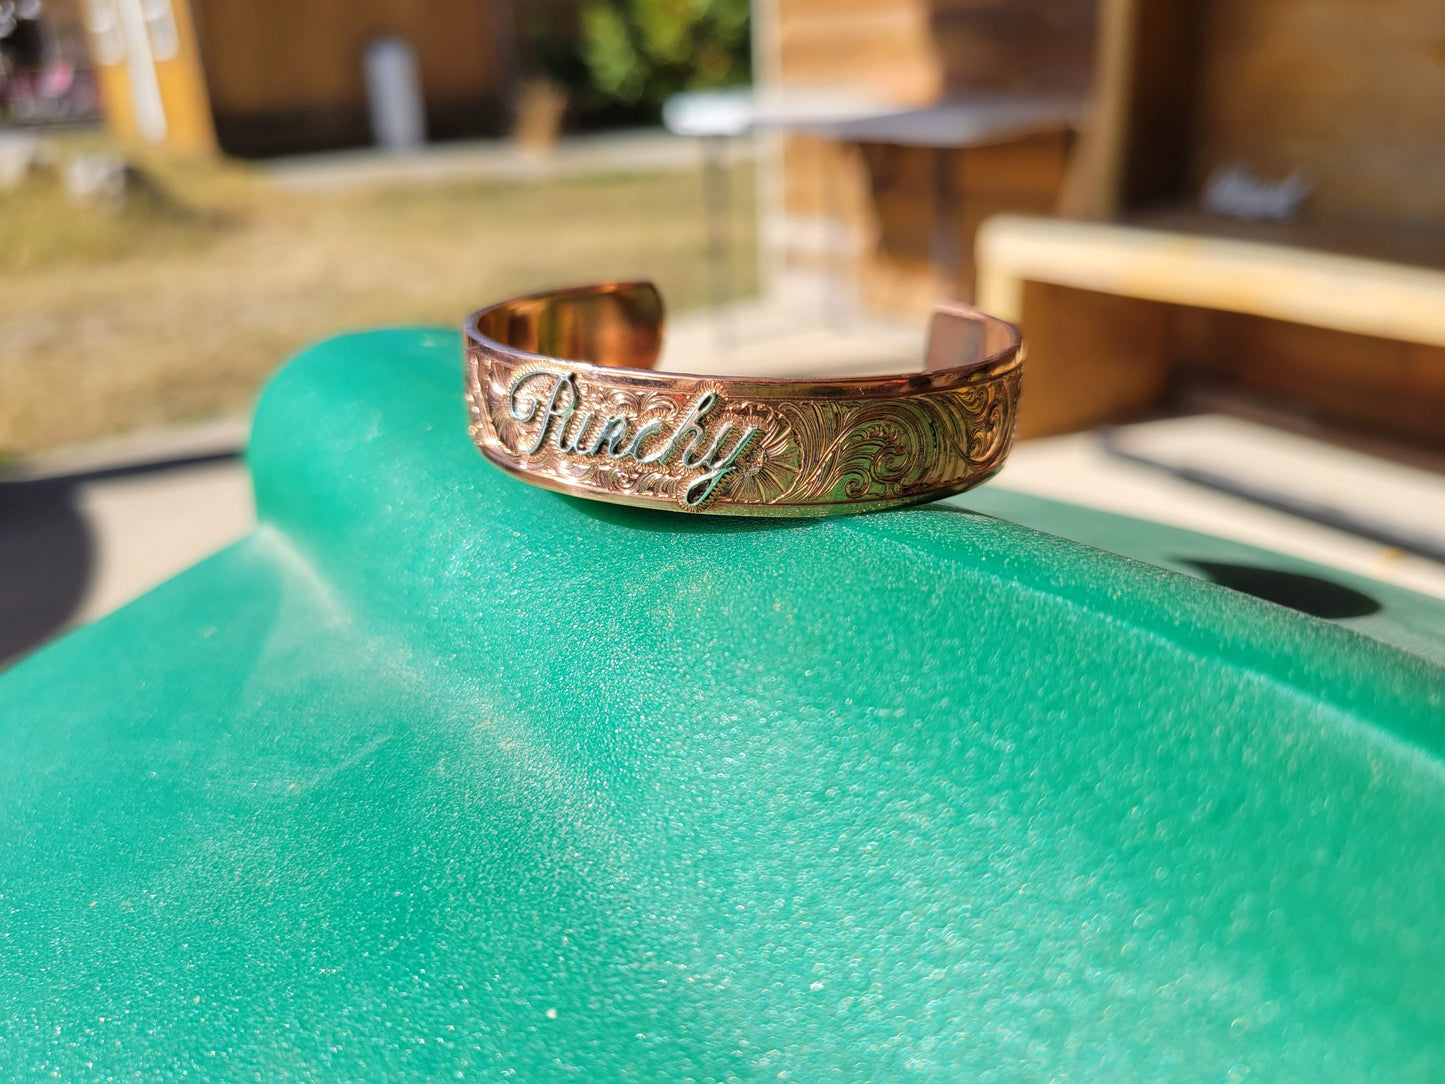 Punchy Copper Hand Engraved Cuff STyle Bracelet, Sterling Silver Overlay, Cowgirl Gift idea